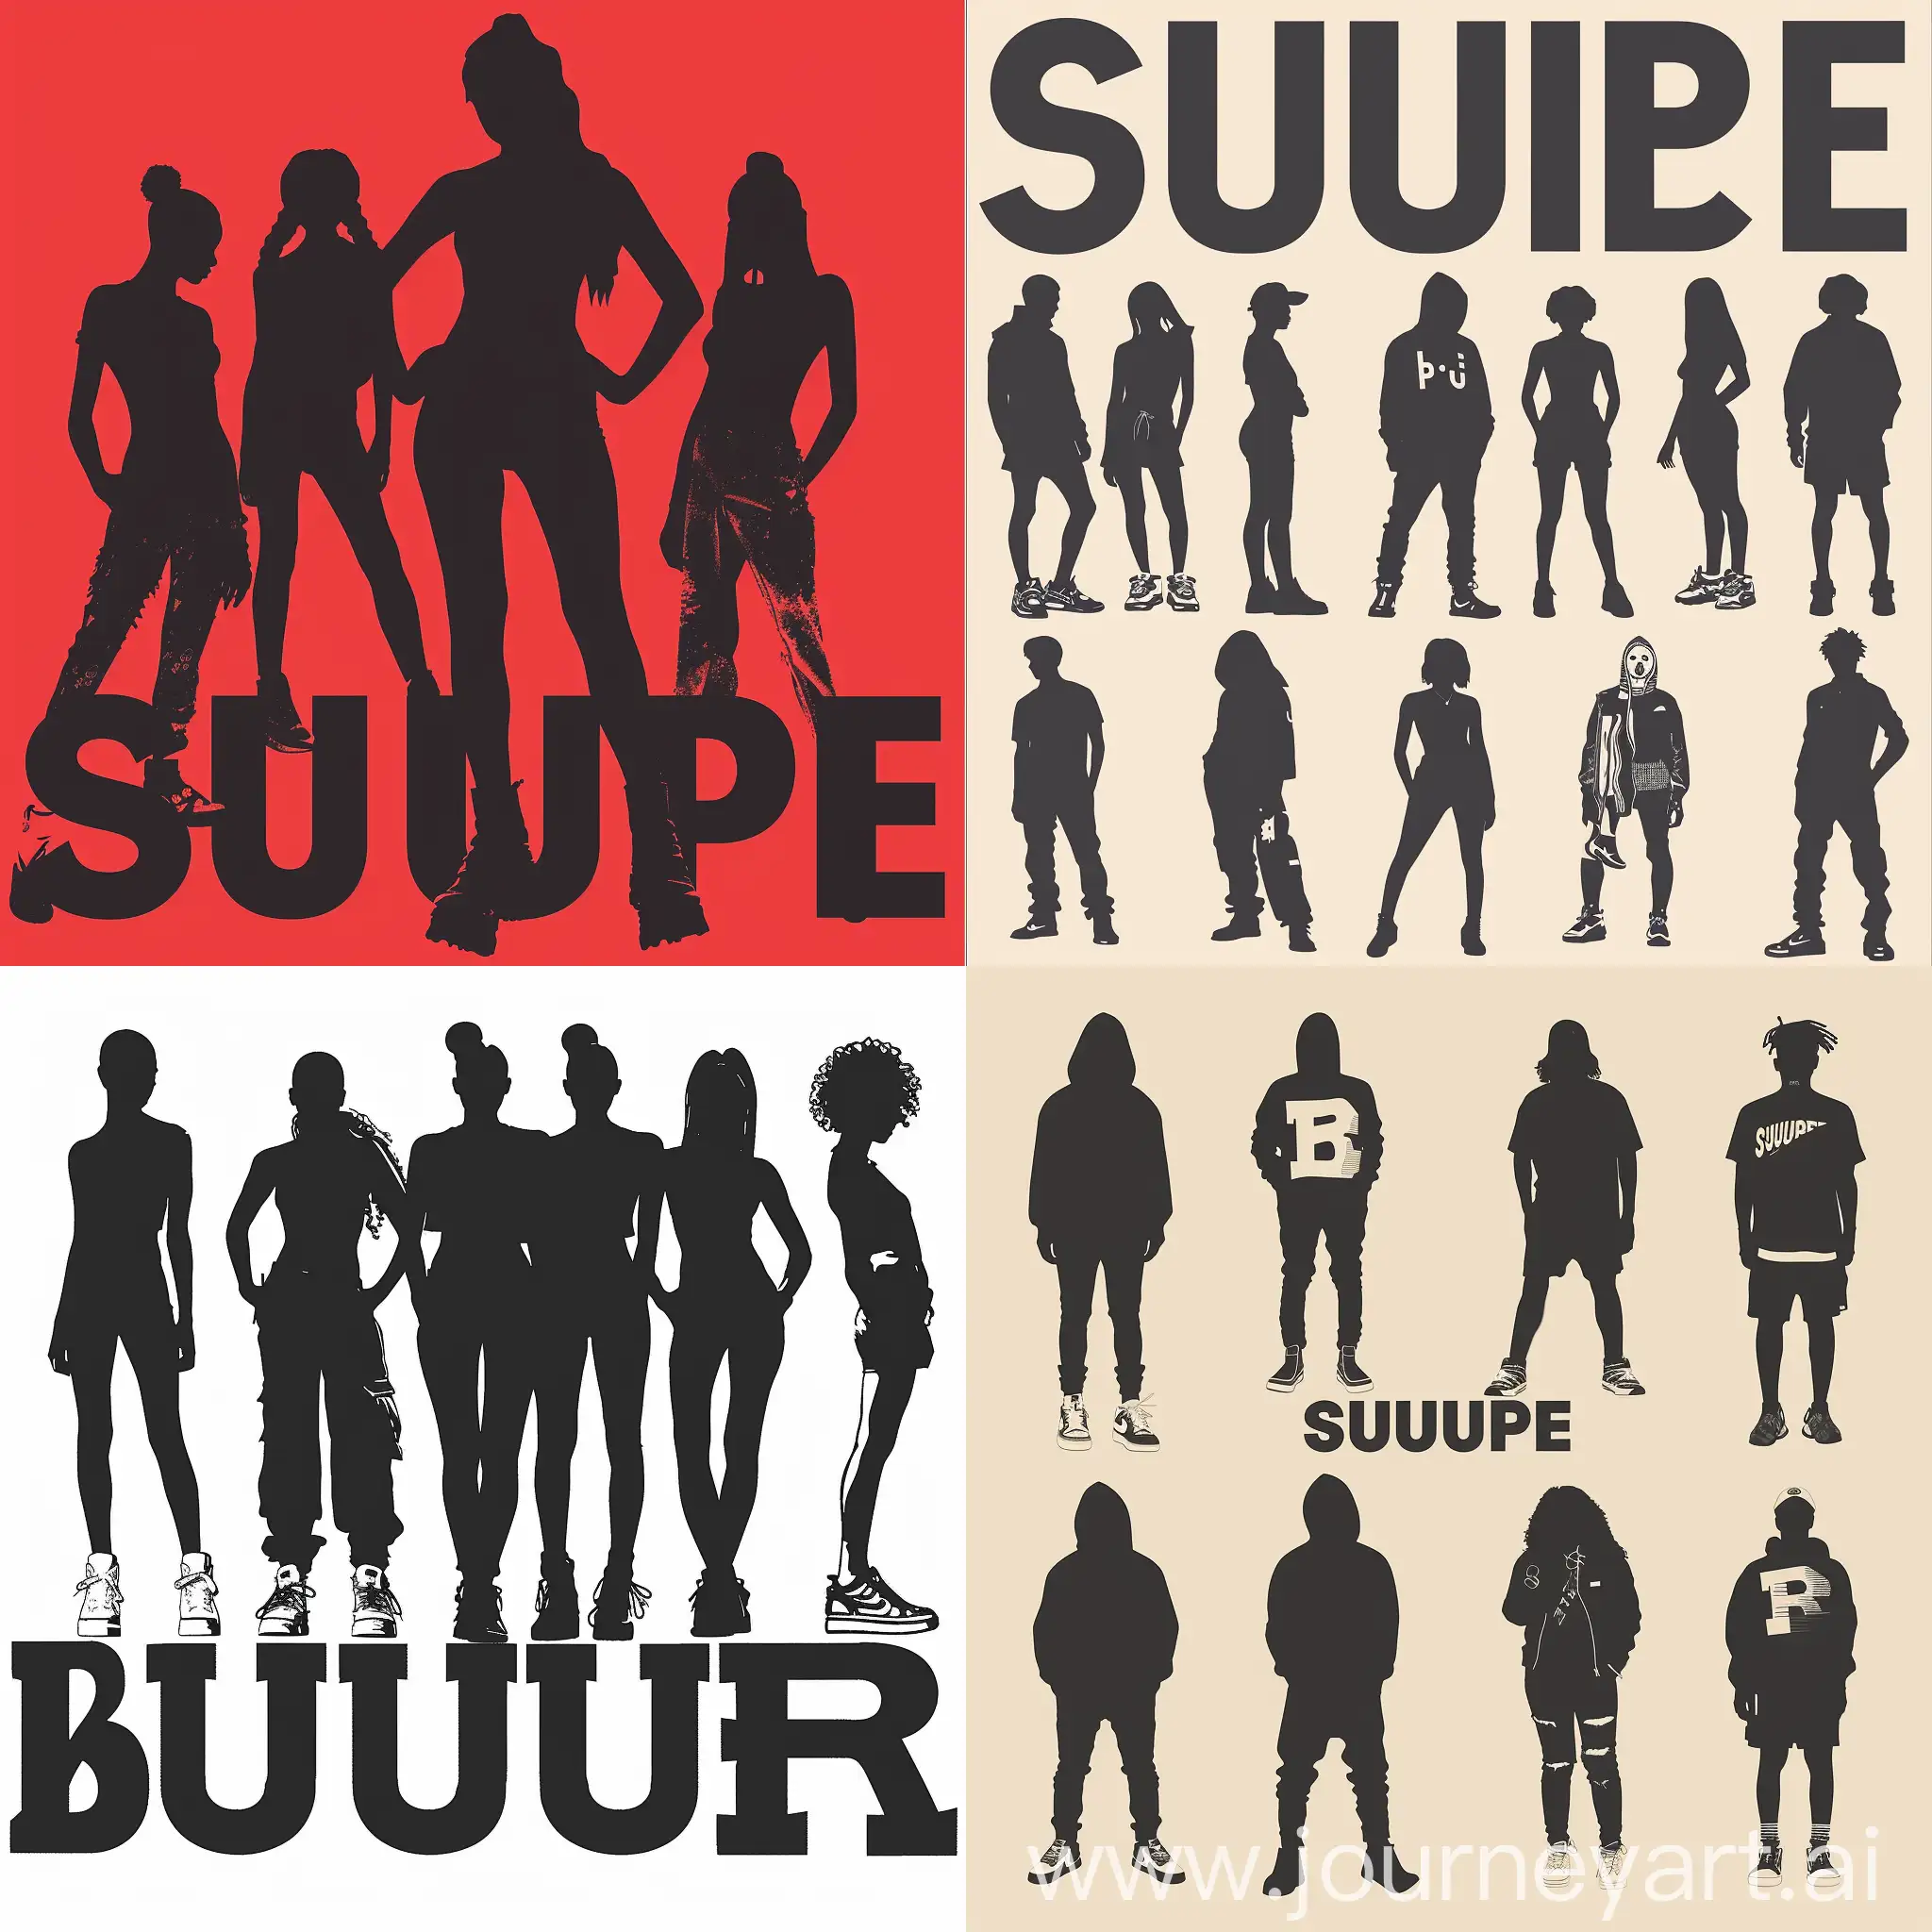 Urban-Silhouette-Supreme-Streetwear-Brand-with-Influential-Human-Figures